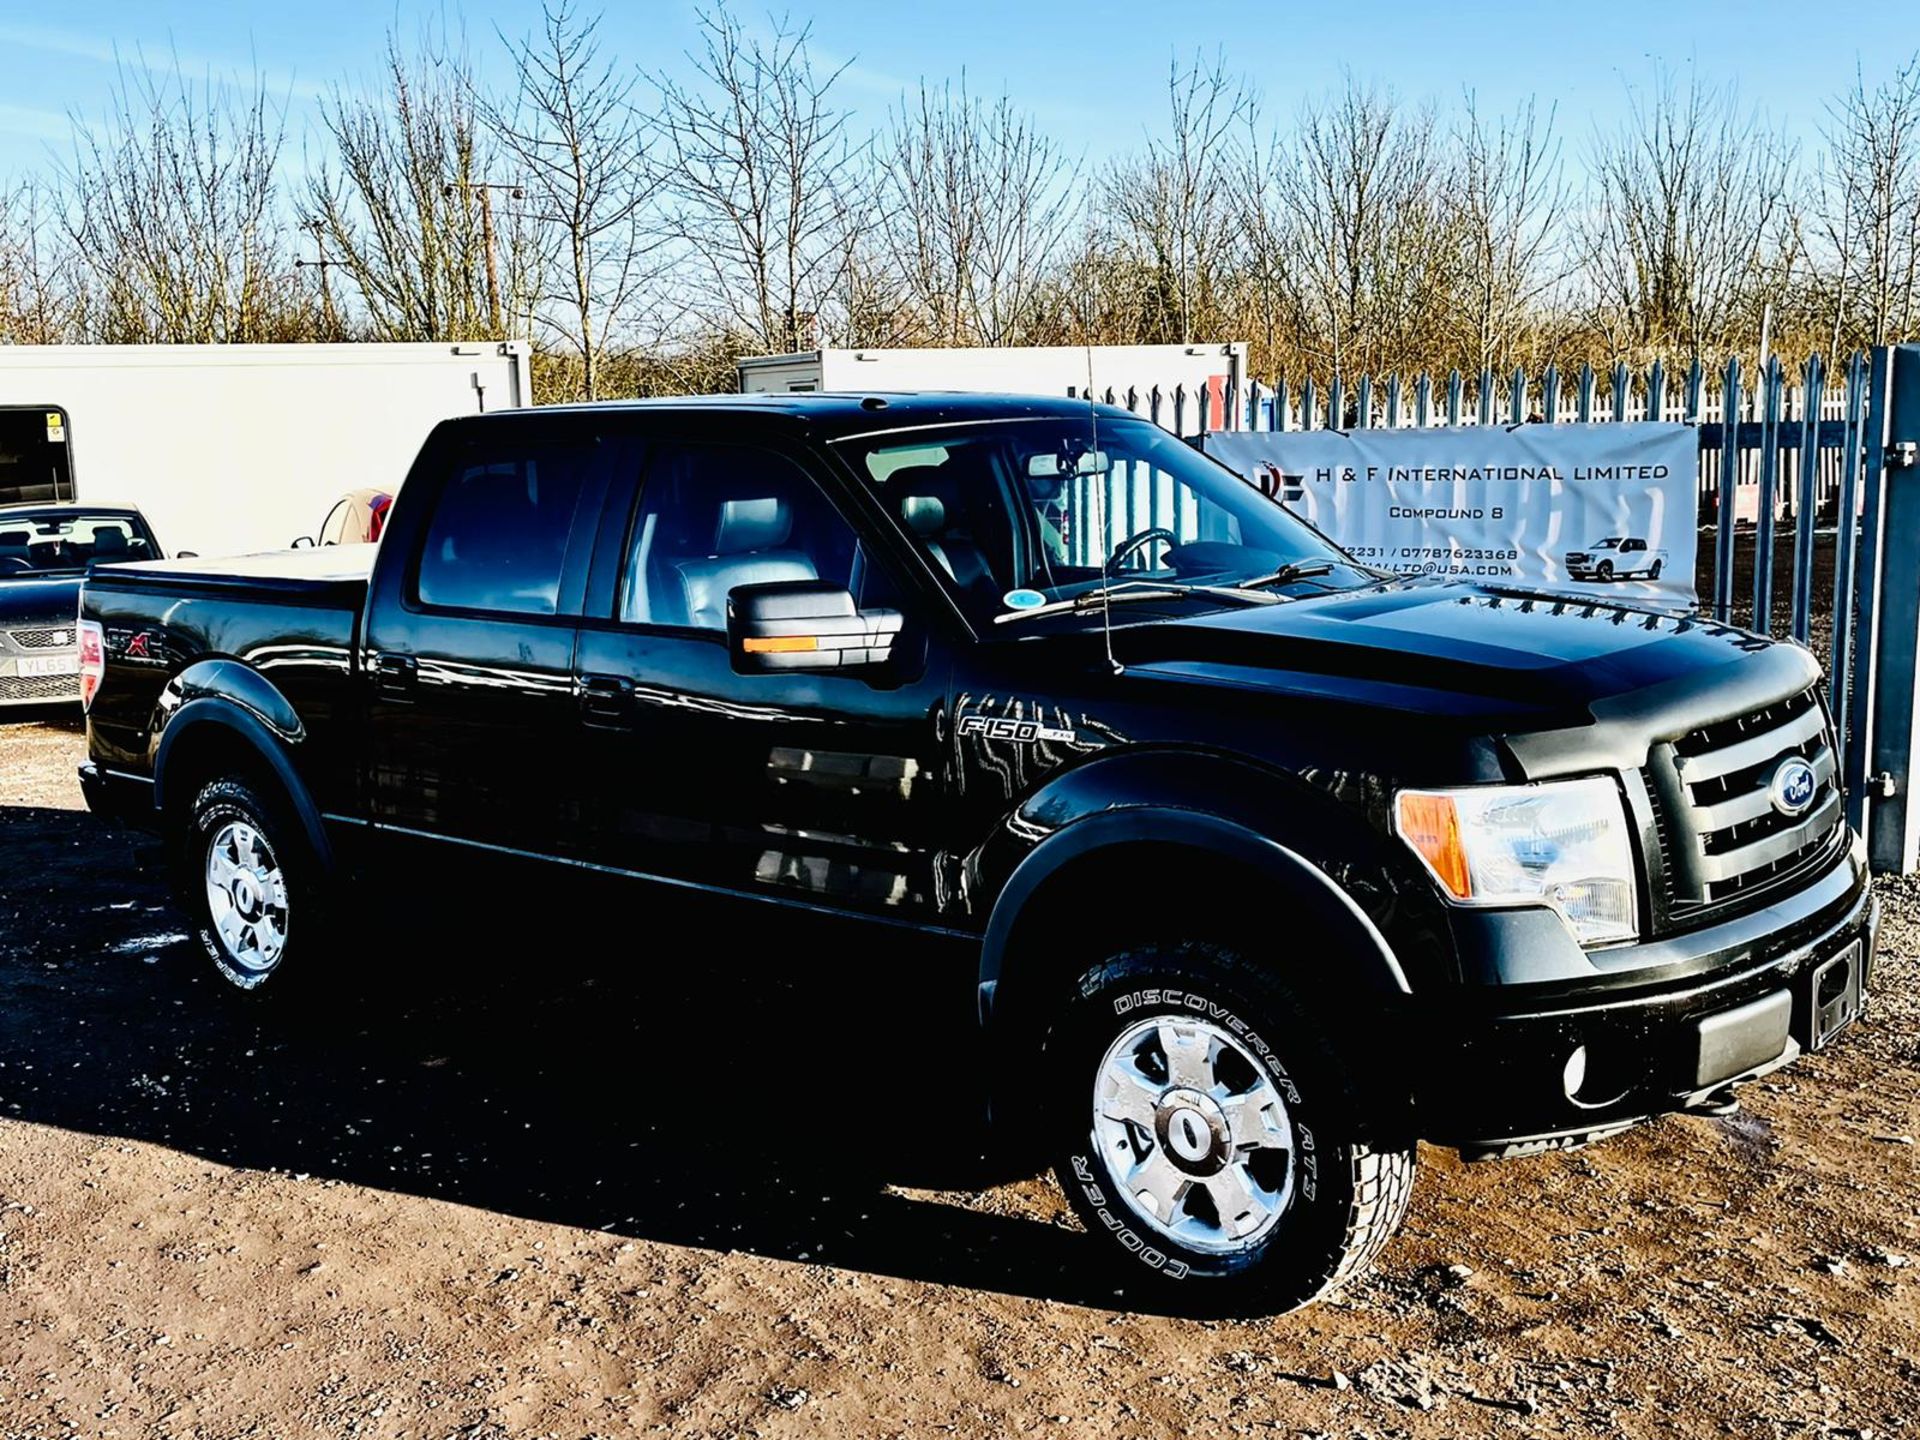 Ford F-150 5.4L V8 SuperCab 4WD FX4 Edition '2010 Year' Colour Coded Package - Top Spec - Image 2 of 44